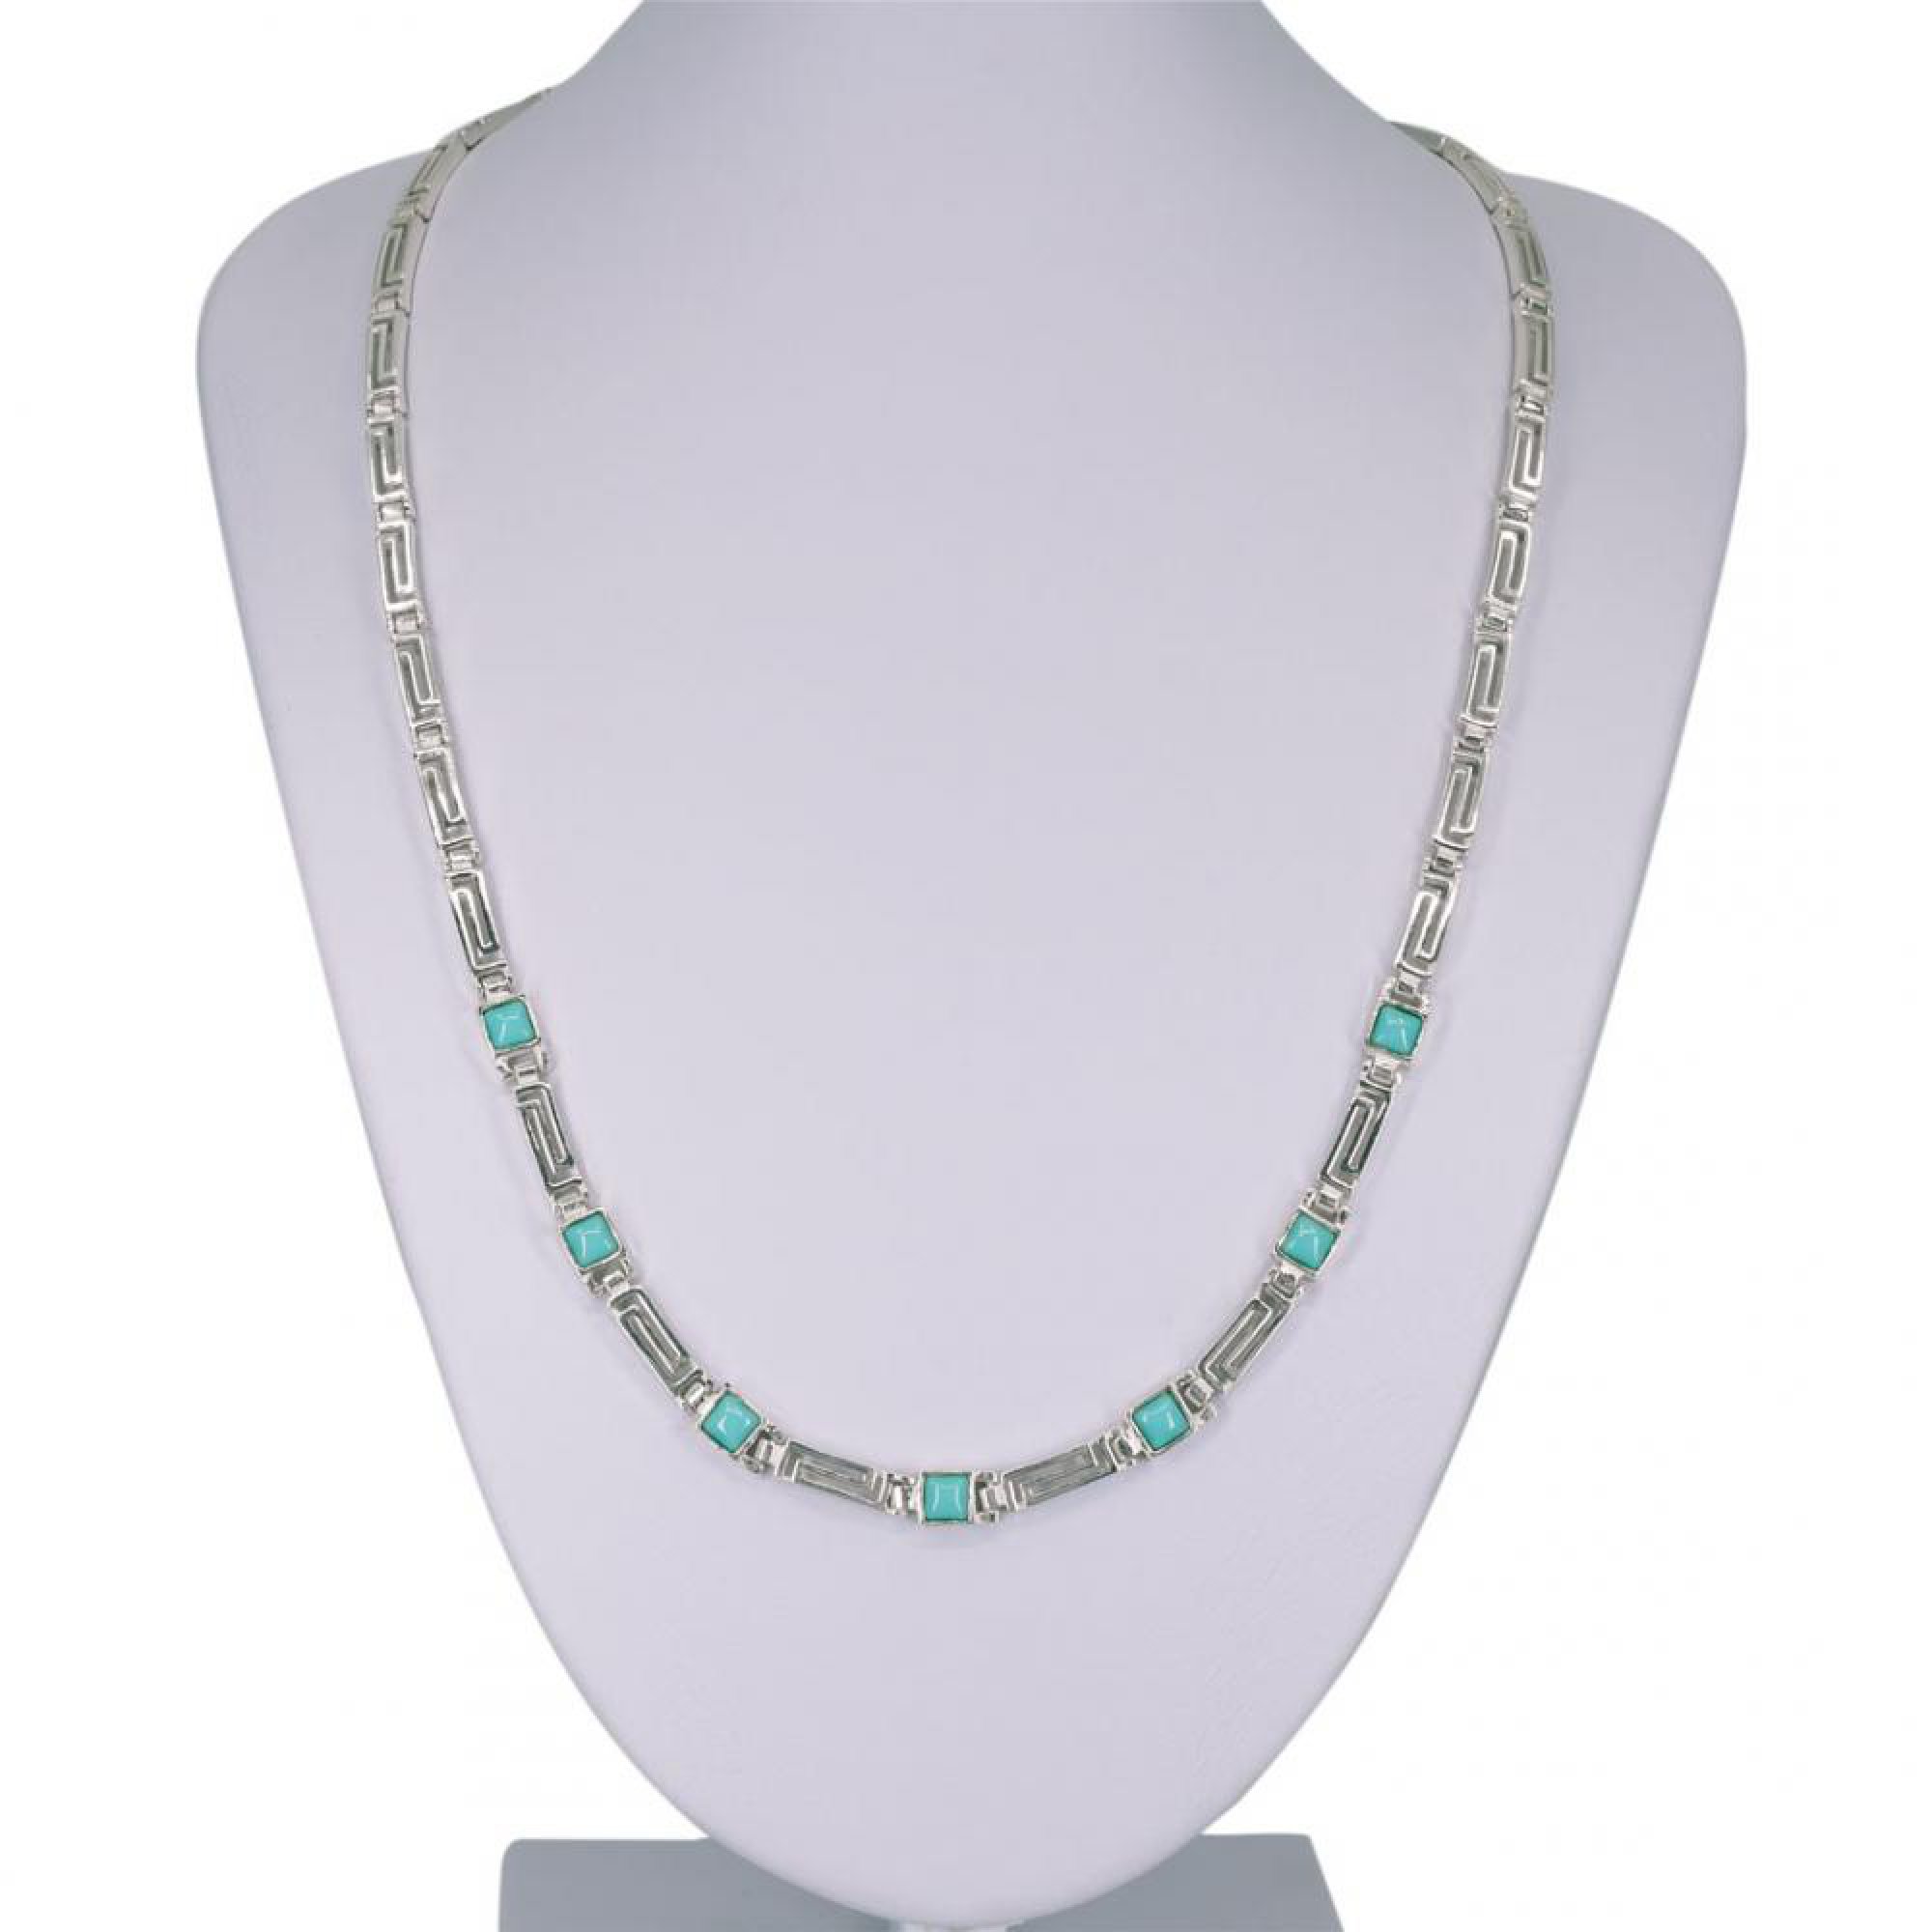 Meander necklace with turquoise stones